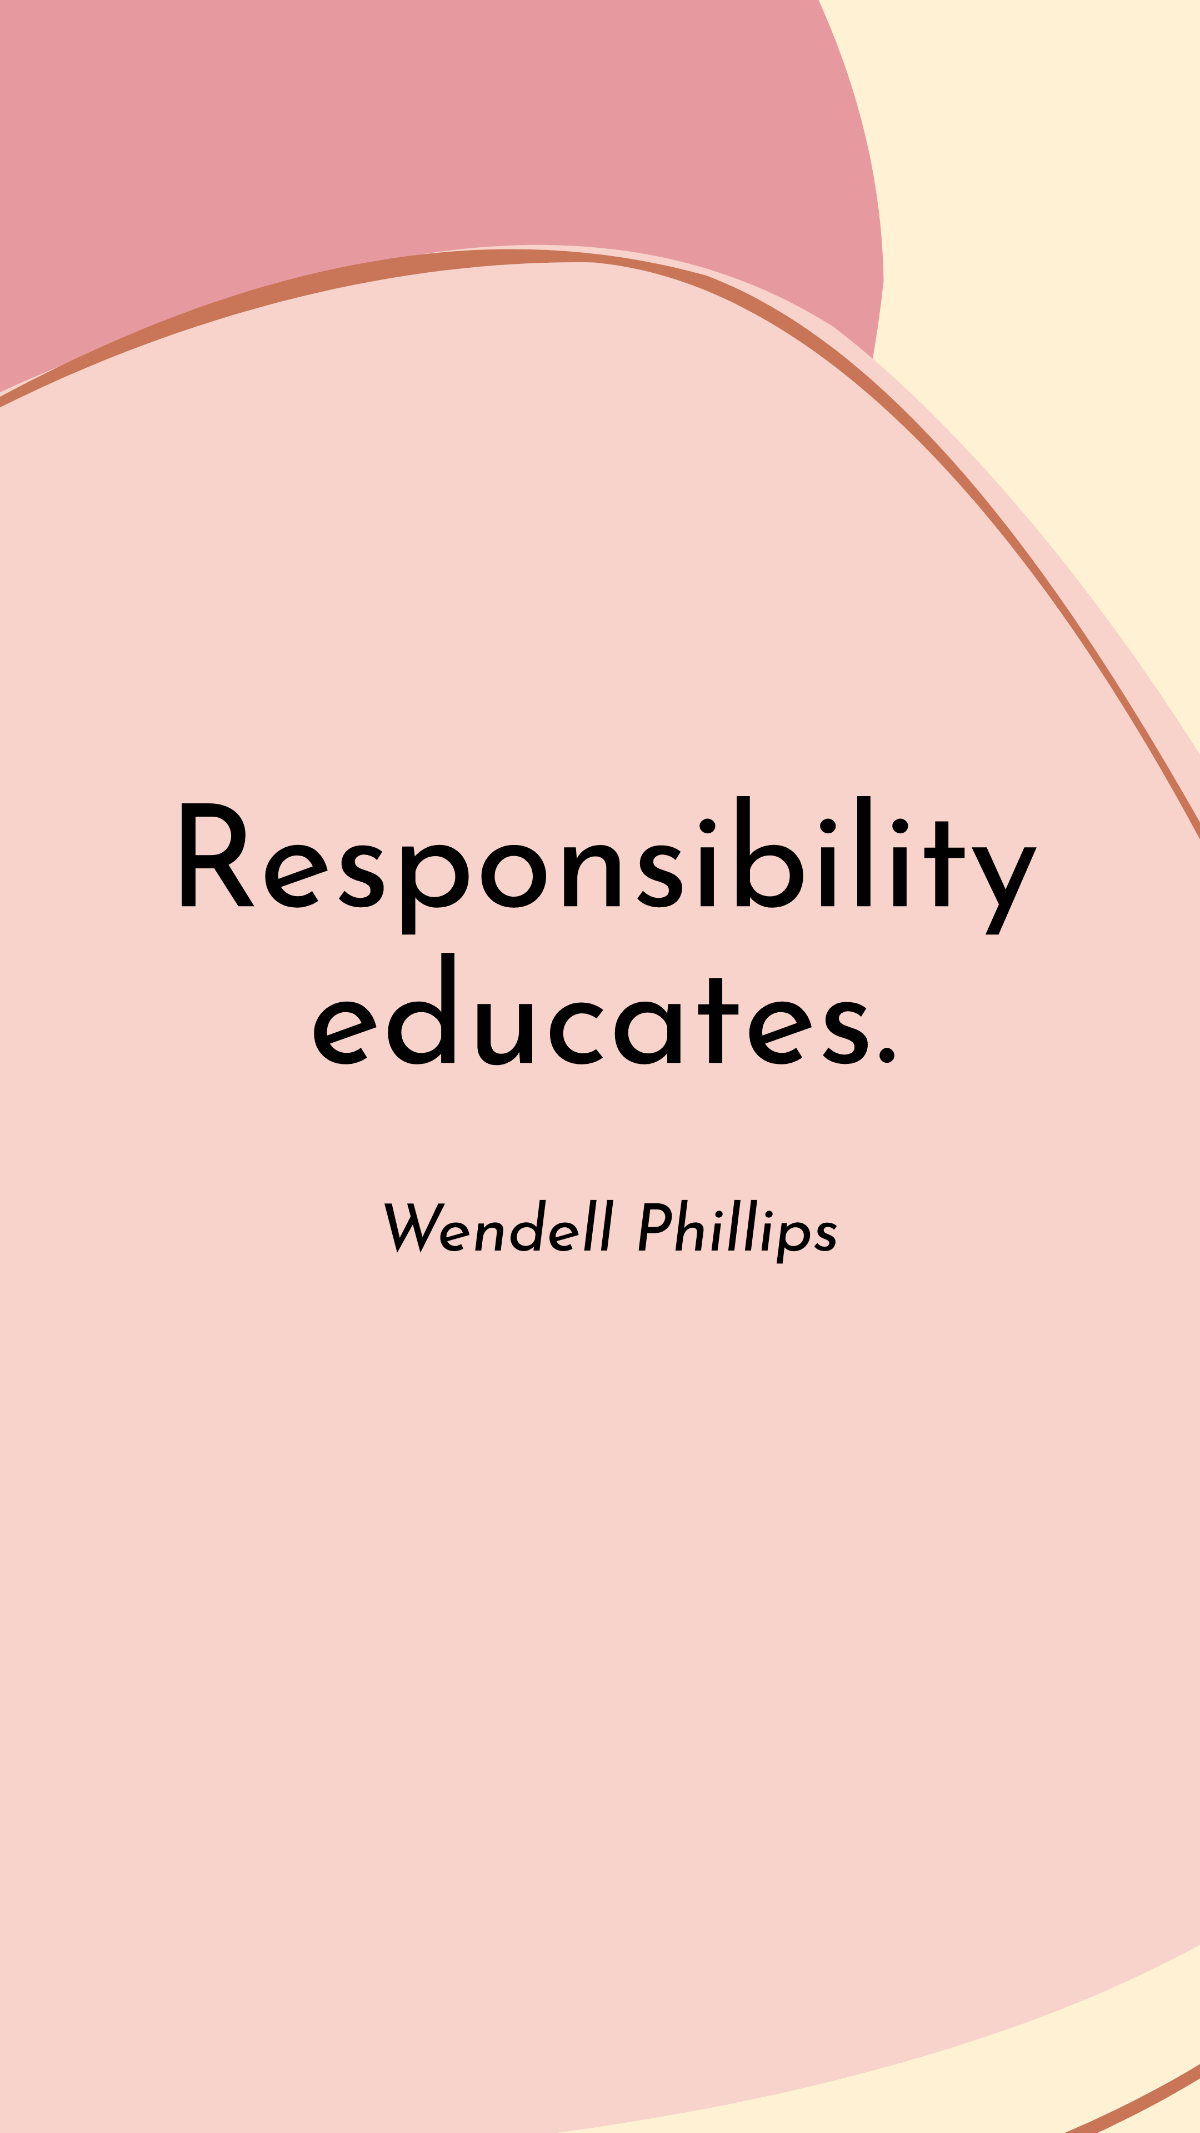 Free Wendell Phillips - Responsibility educates. Template